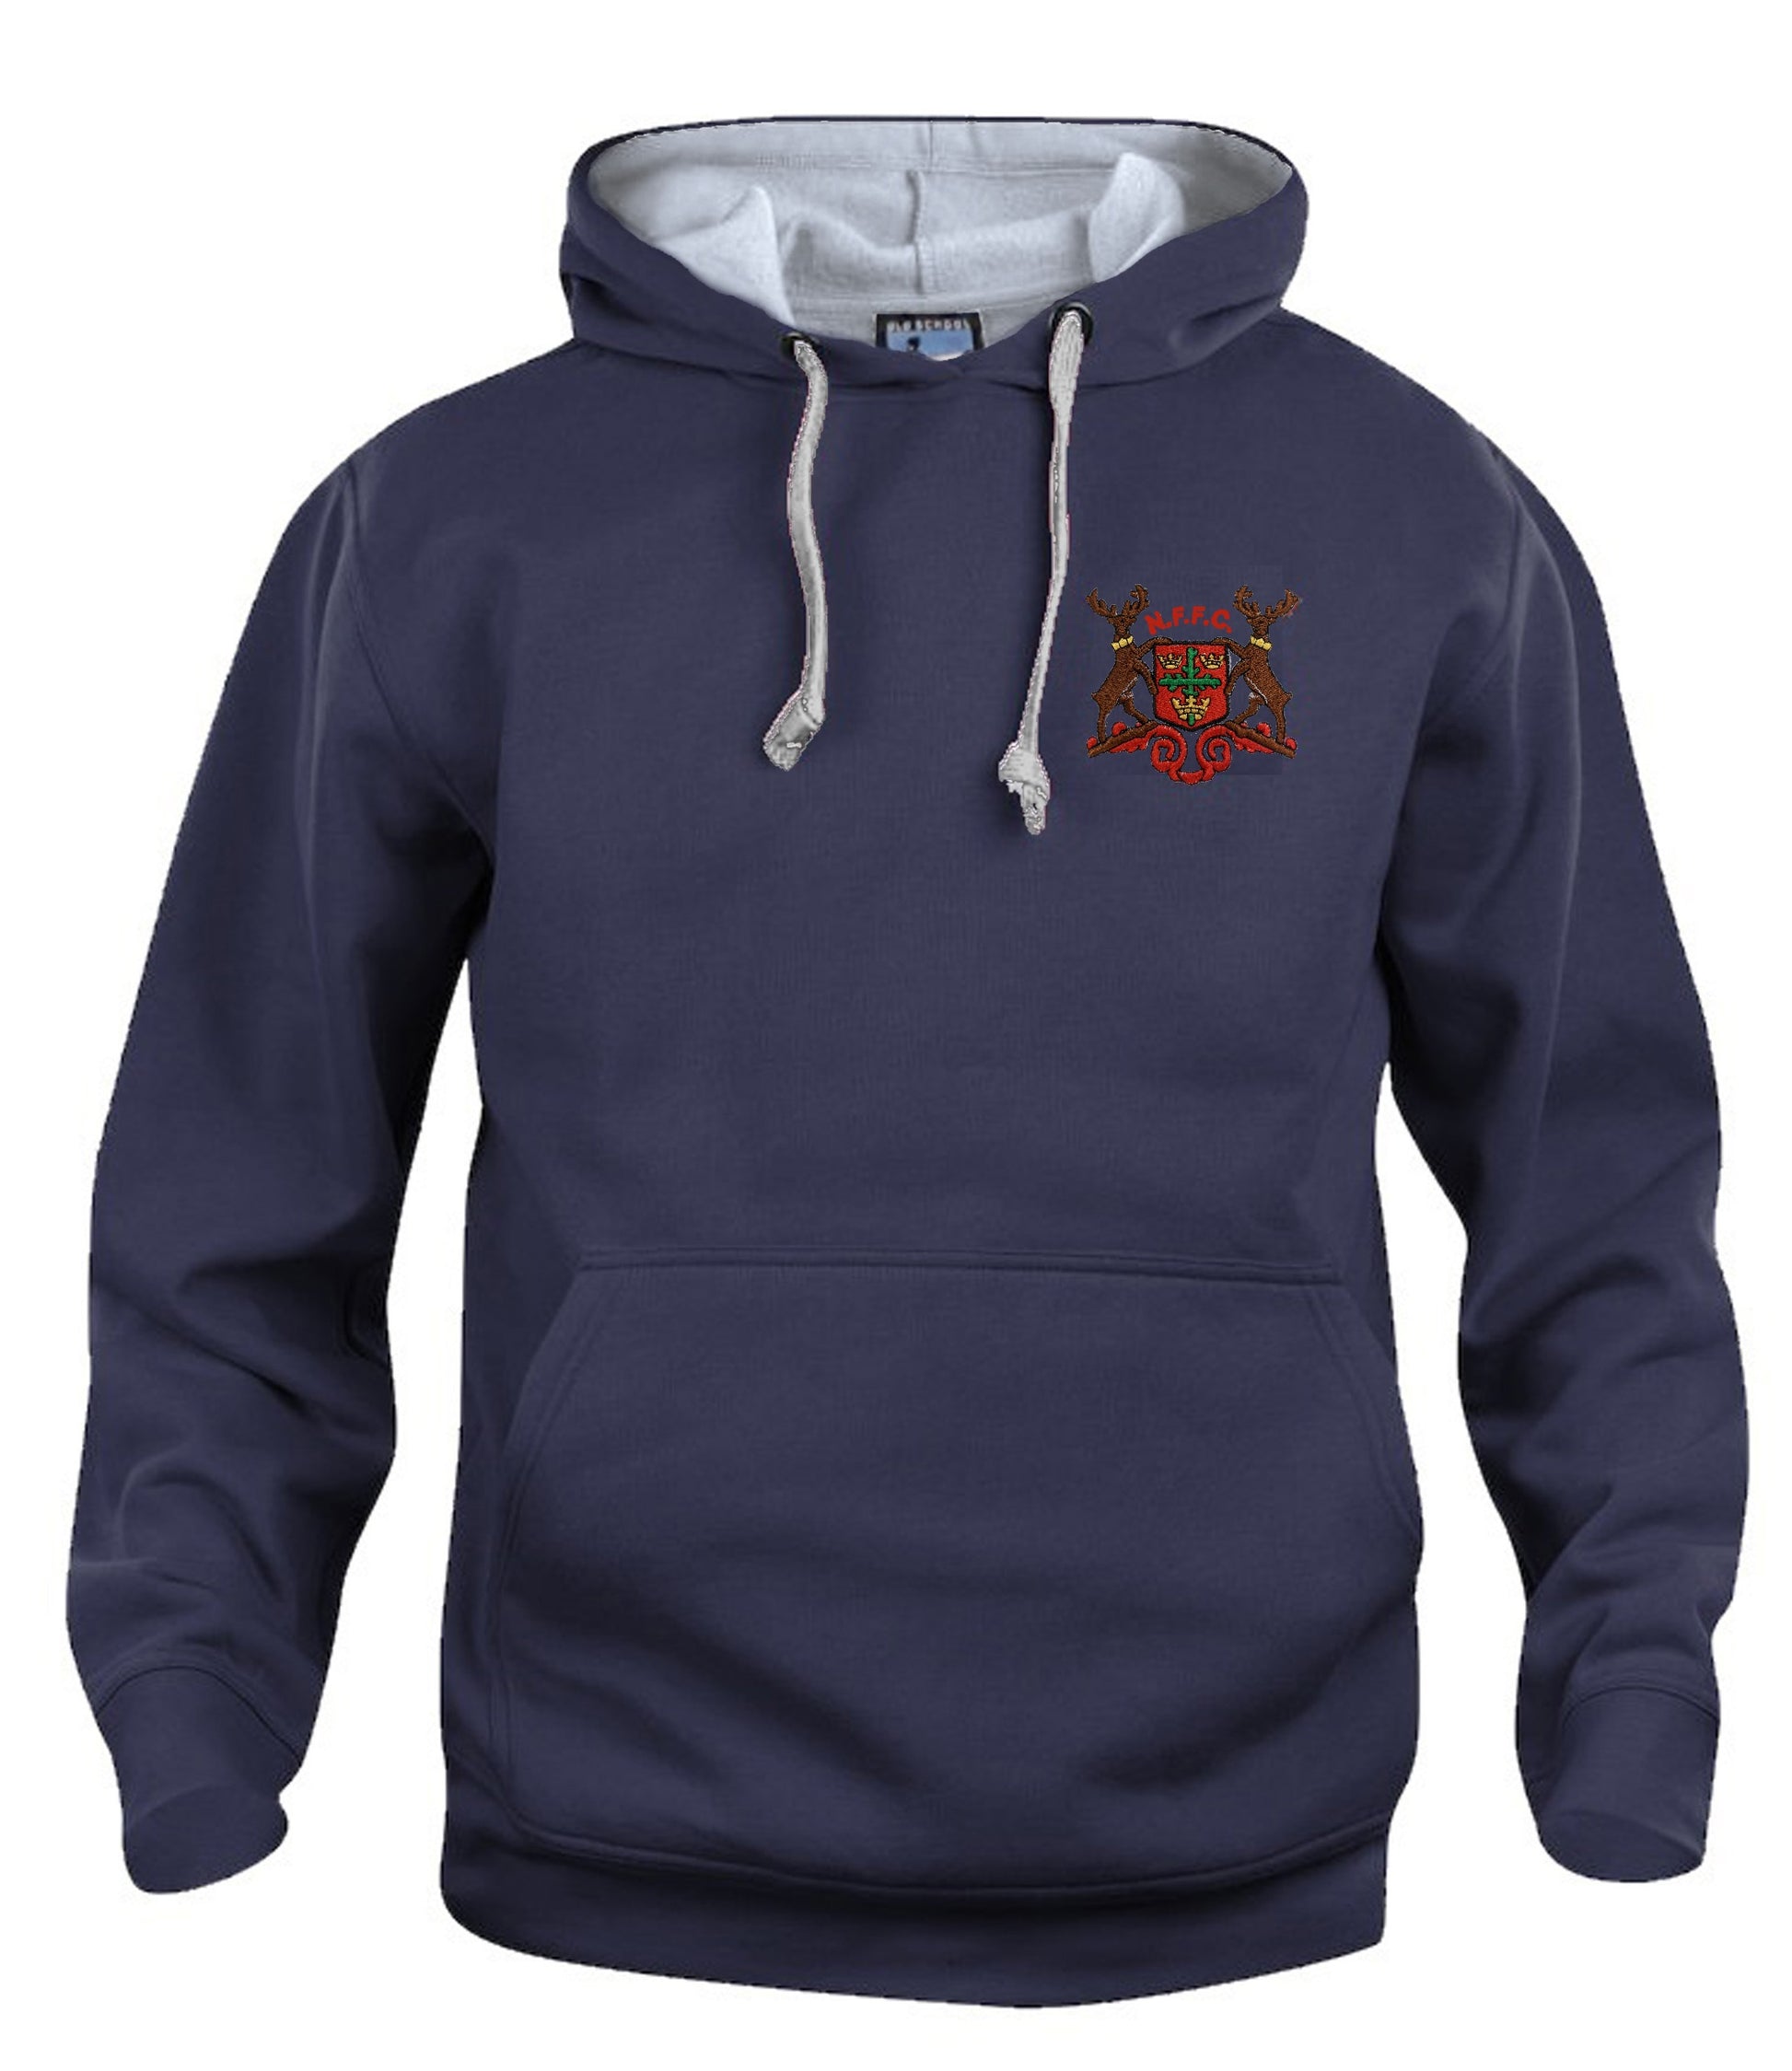 Nottingham Forest Retro Football Hoodie 1950s, 60s and 1970s - Old School Football